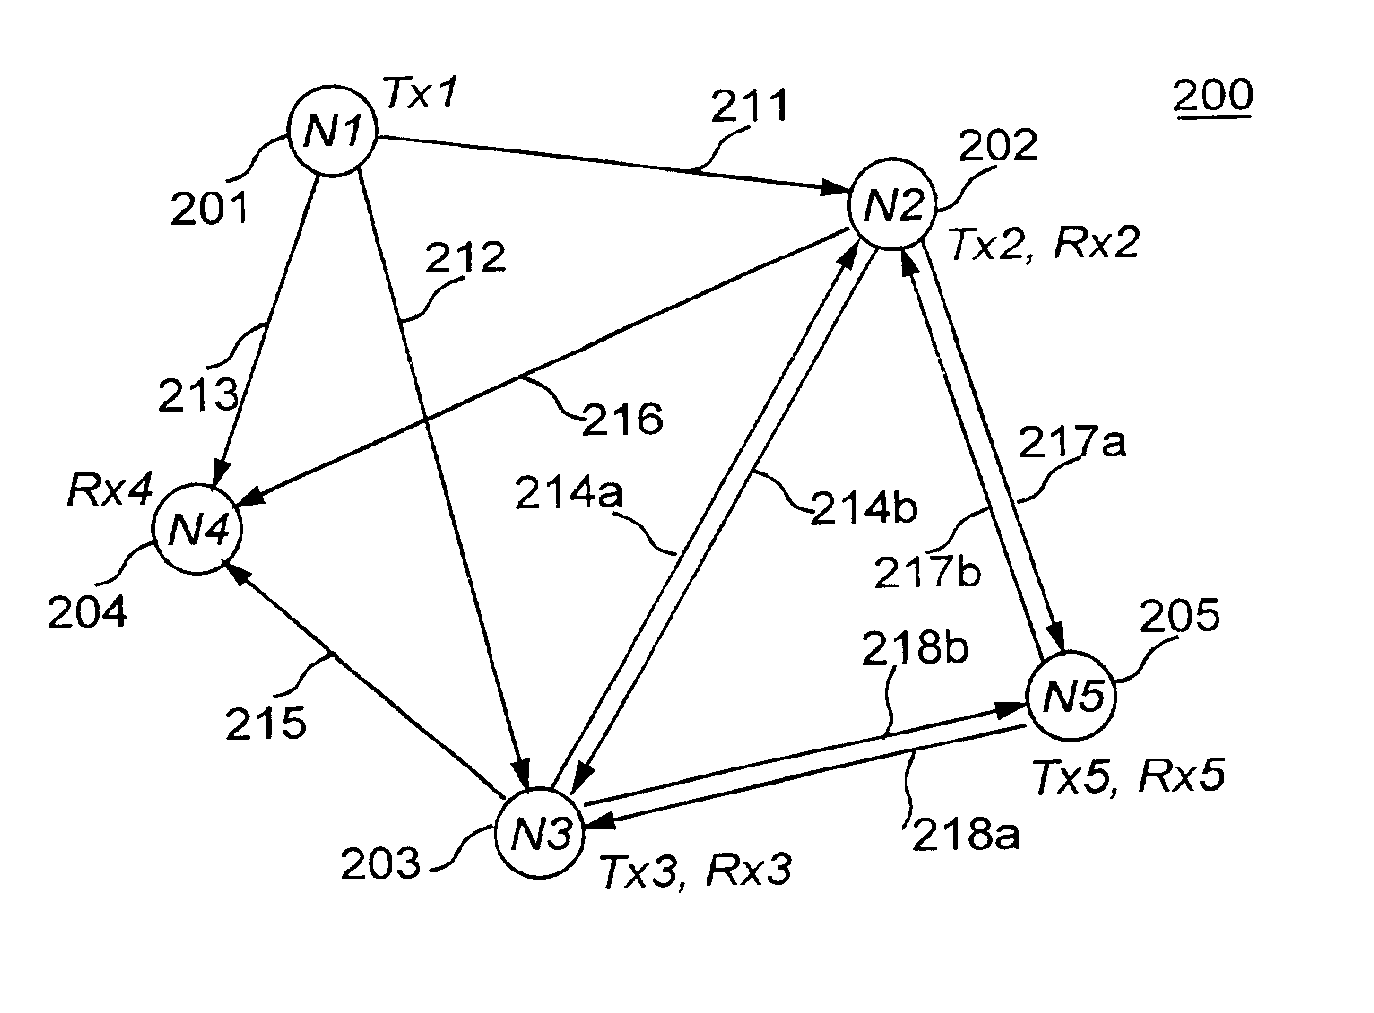 Synchronization and access of the nodes in a communications network